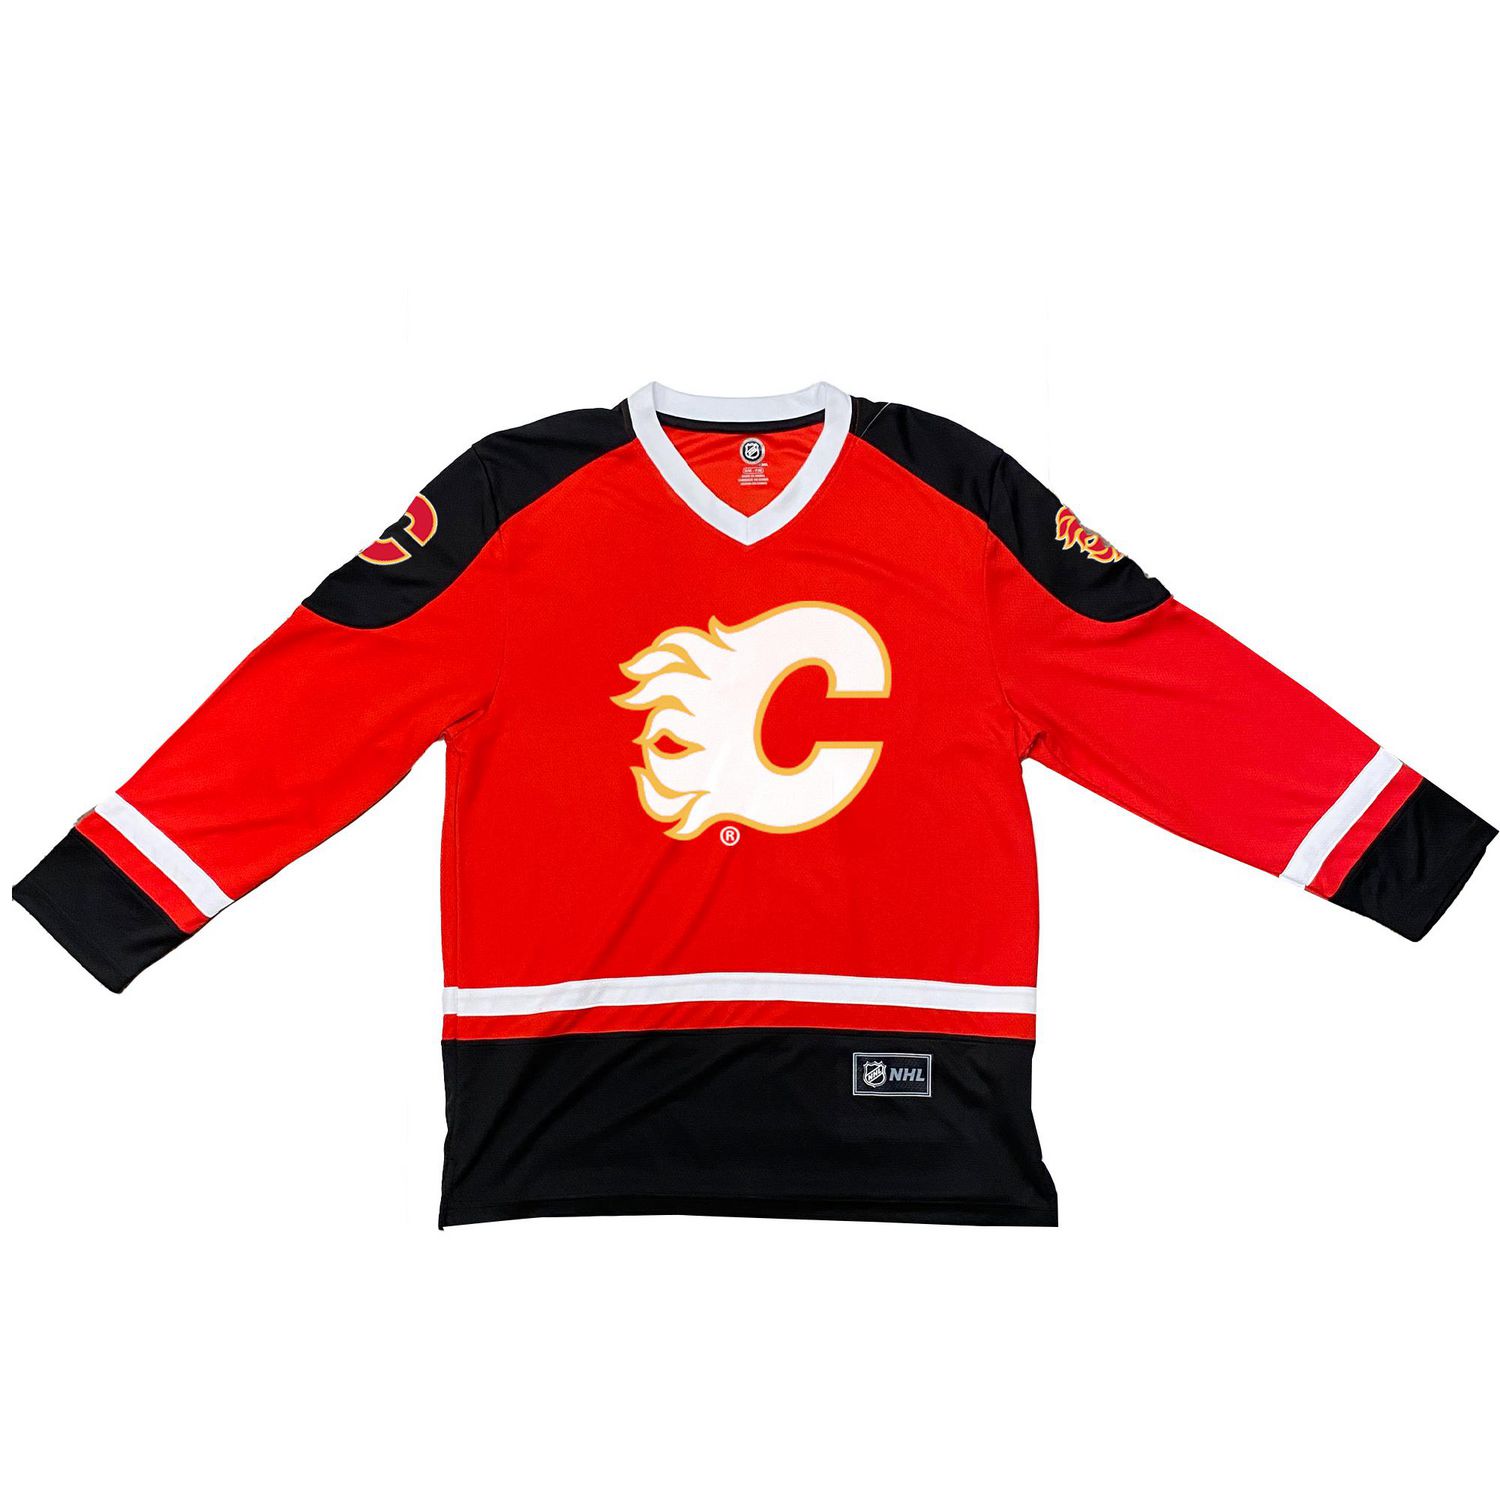 Flames discount jersey